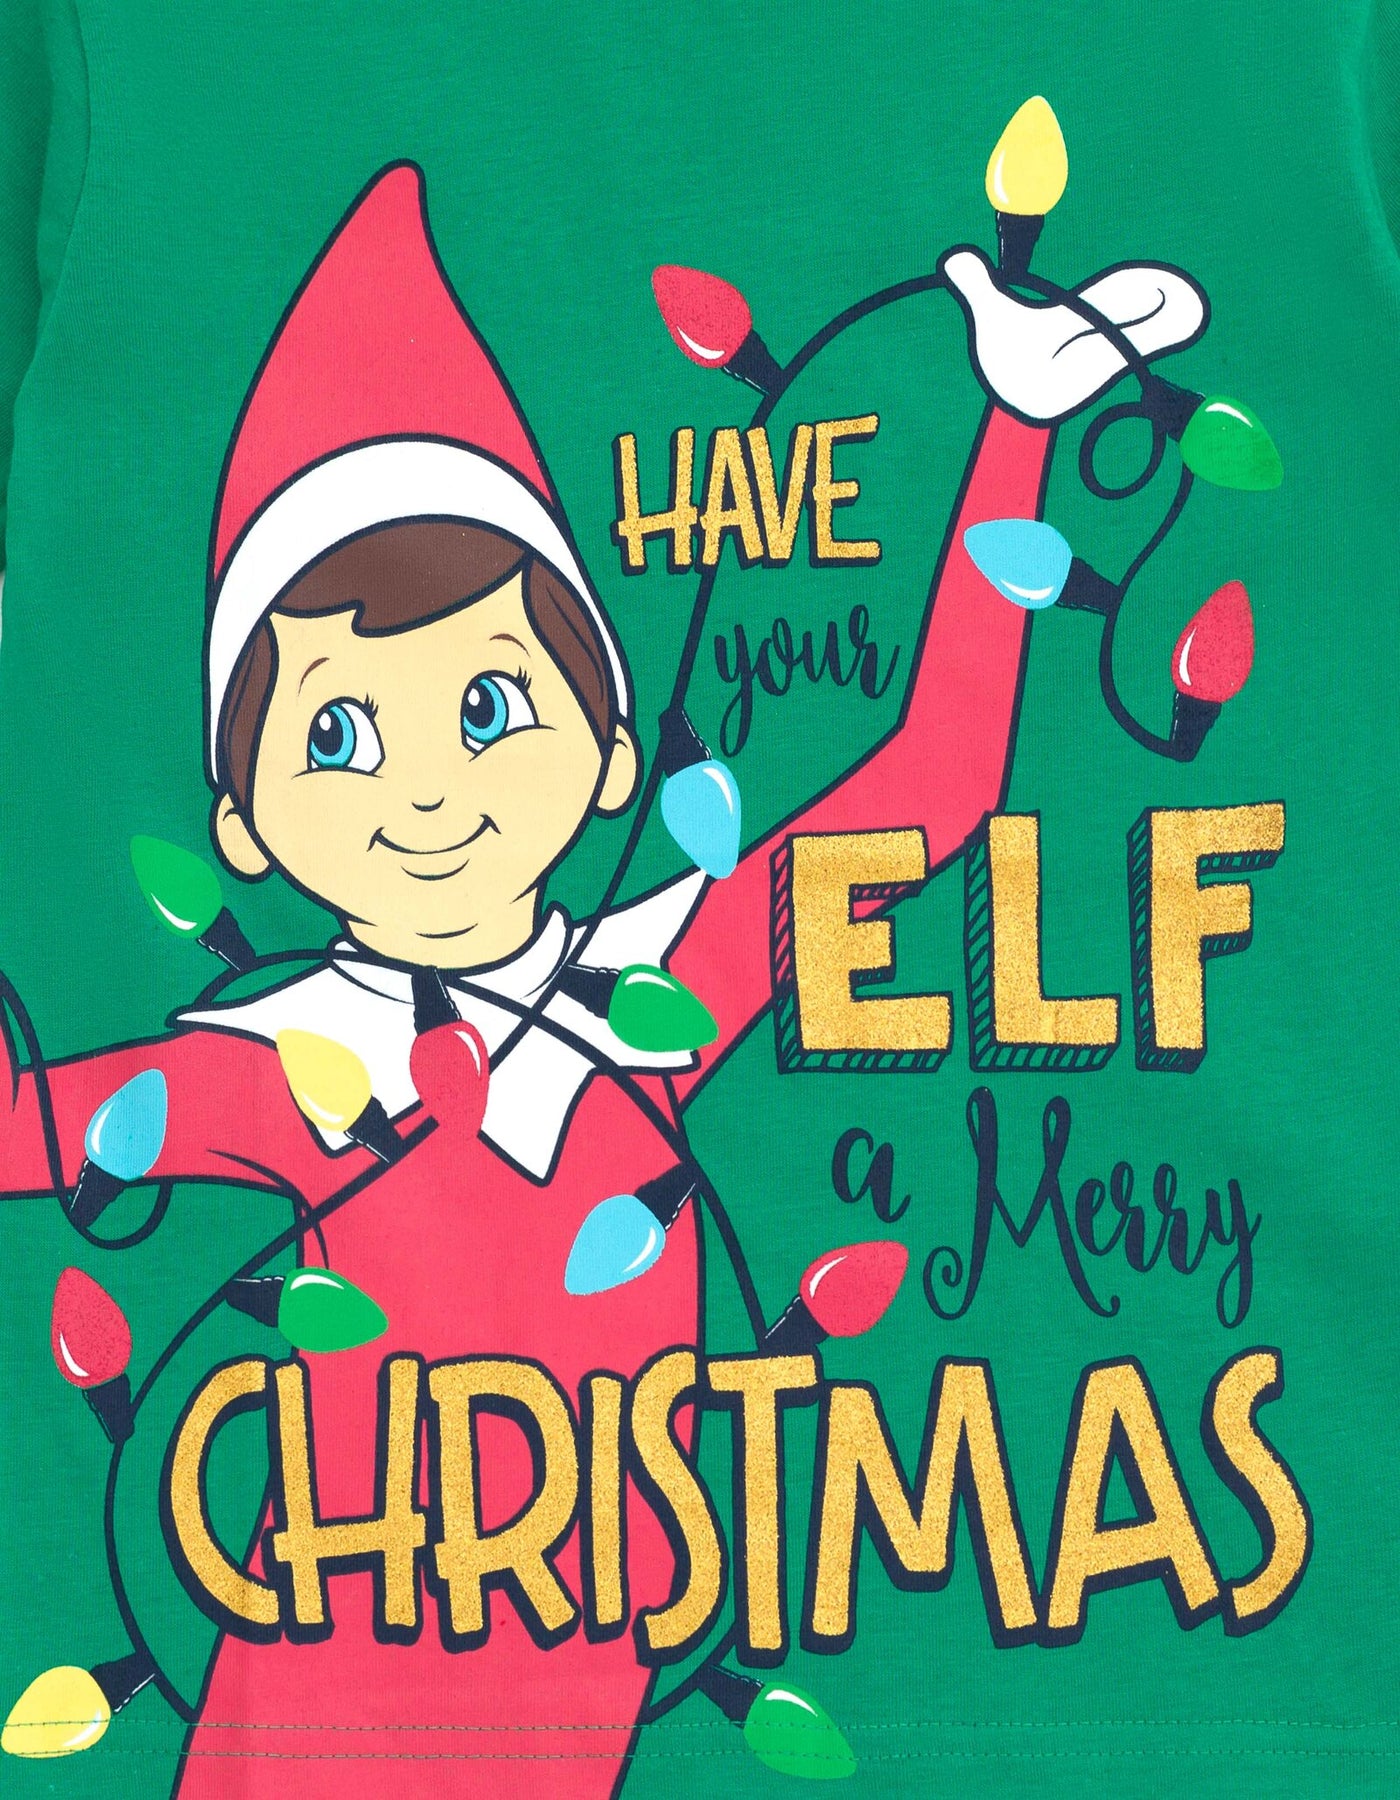 The Elf on the Shelf 2 Pack T-Shirts